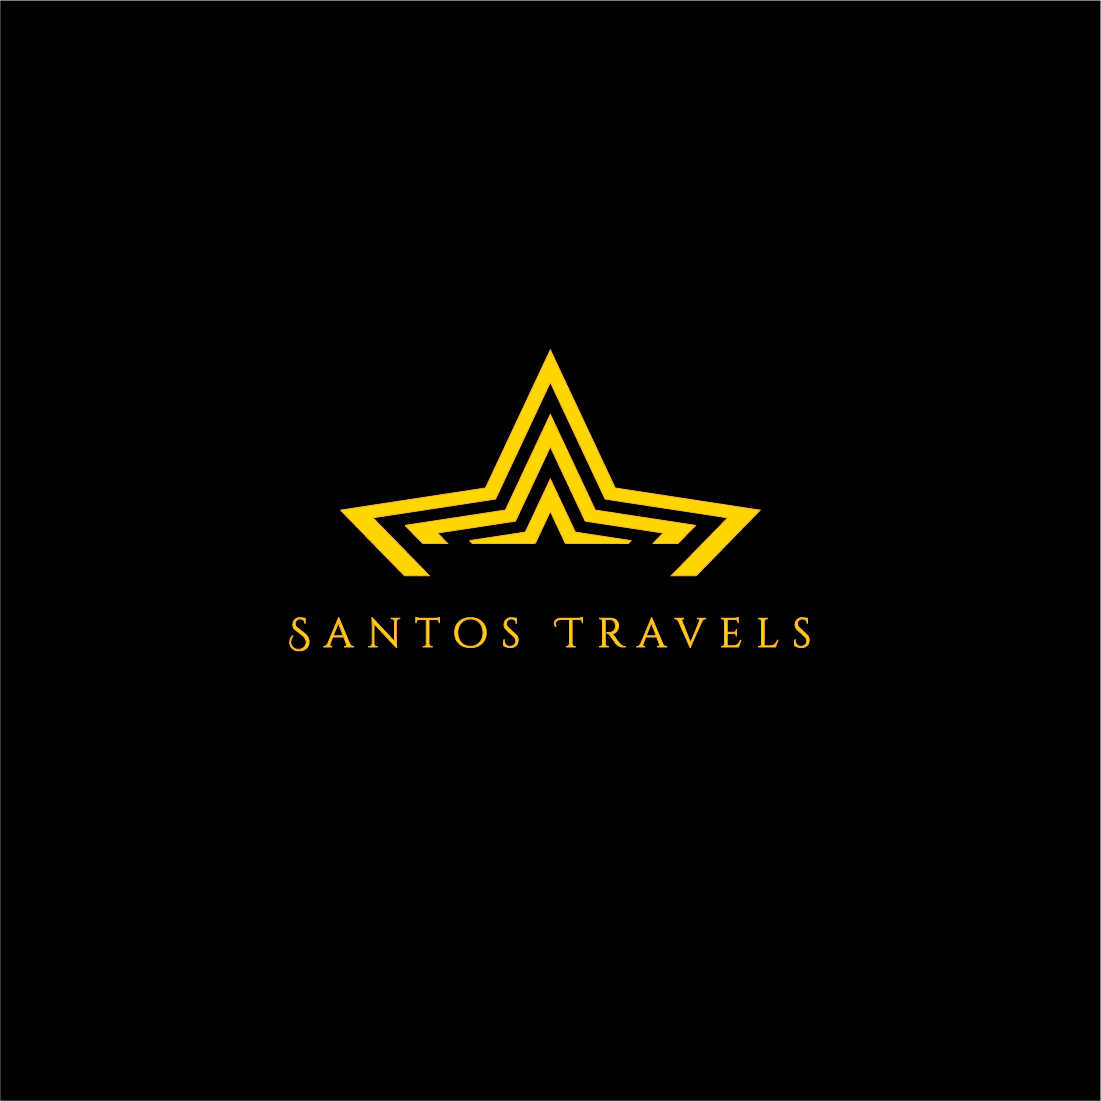 Logo with a star on a black background.